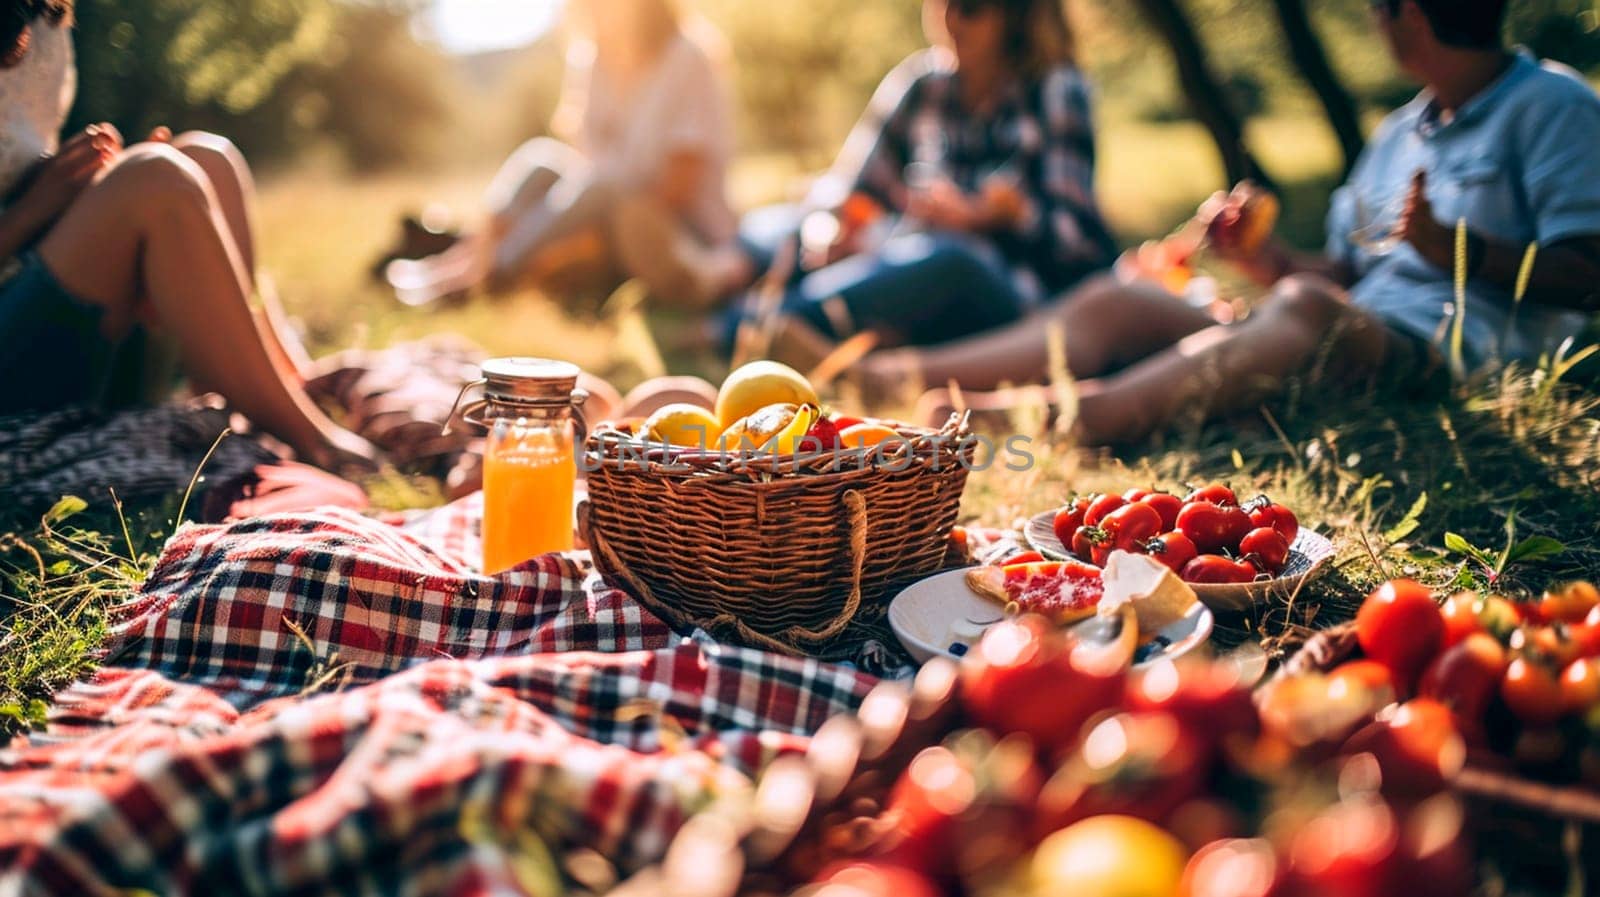 picnic with friends in nature. Selective focus. by yanadjana